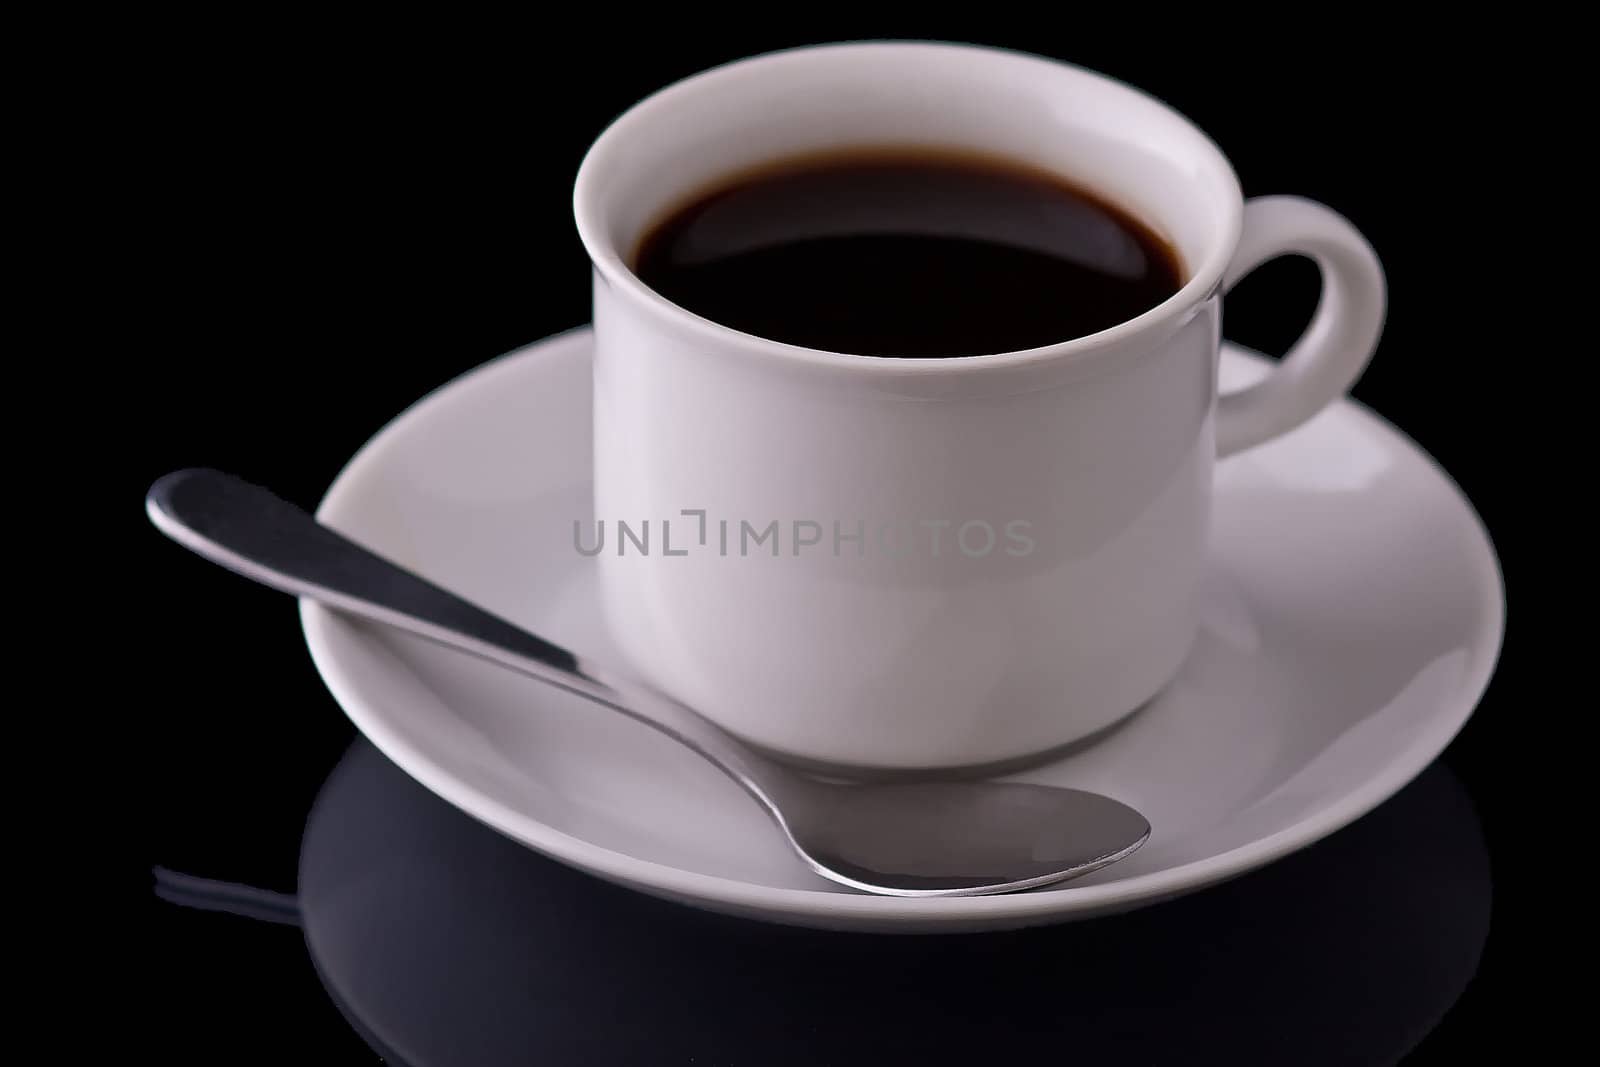 Black coffee in a white coffee cup. On a black mirroring surface.